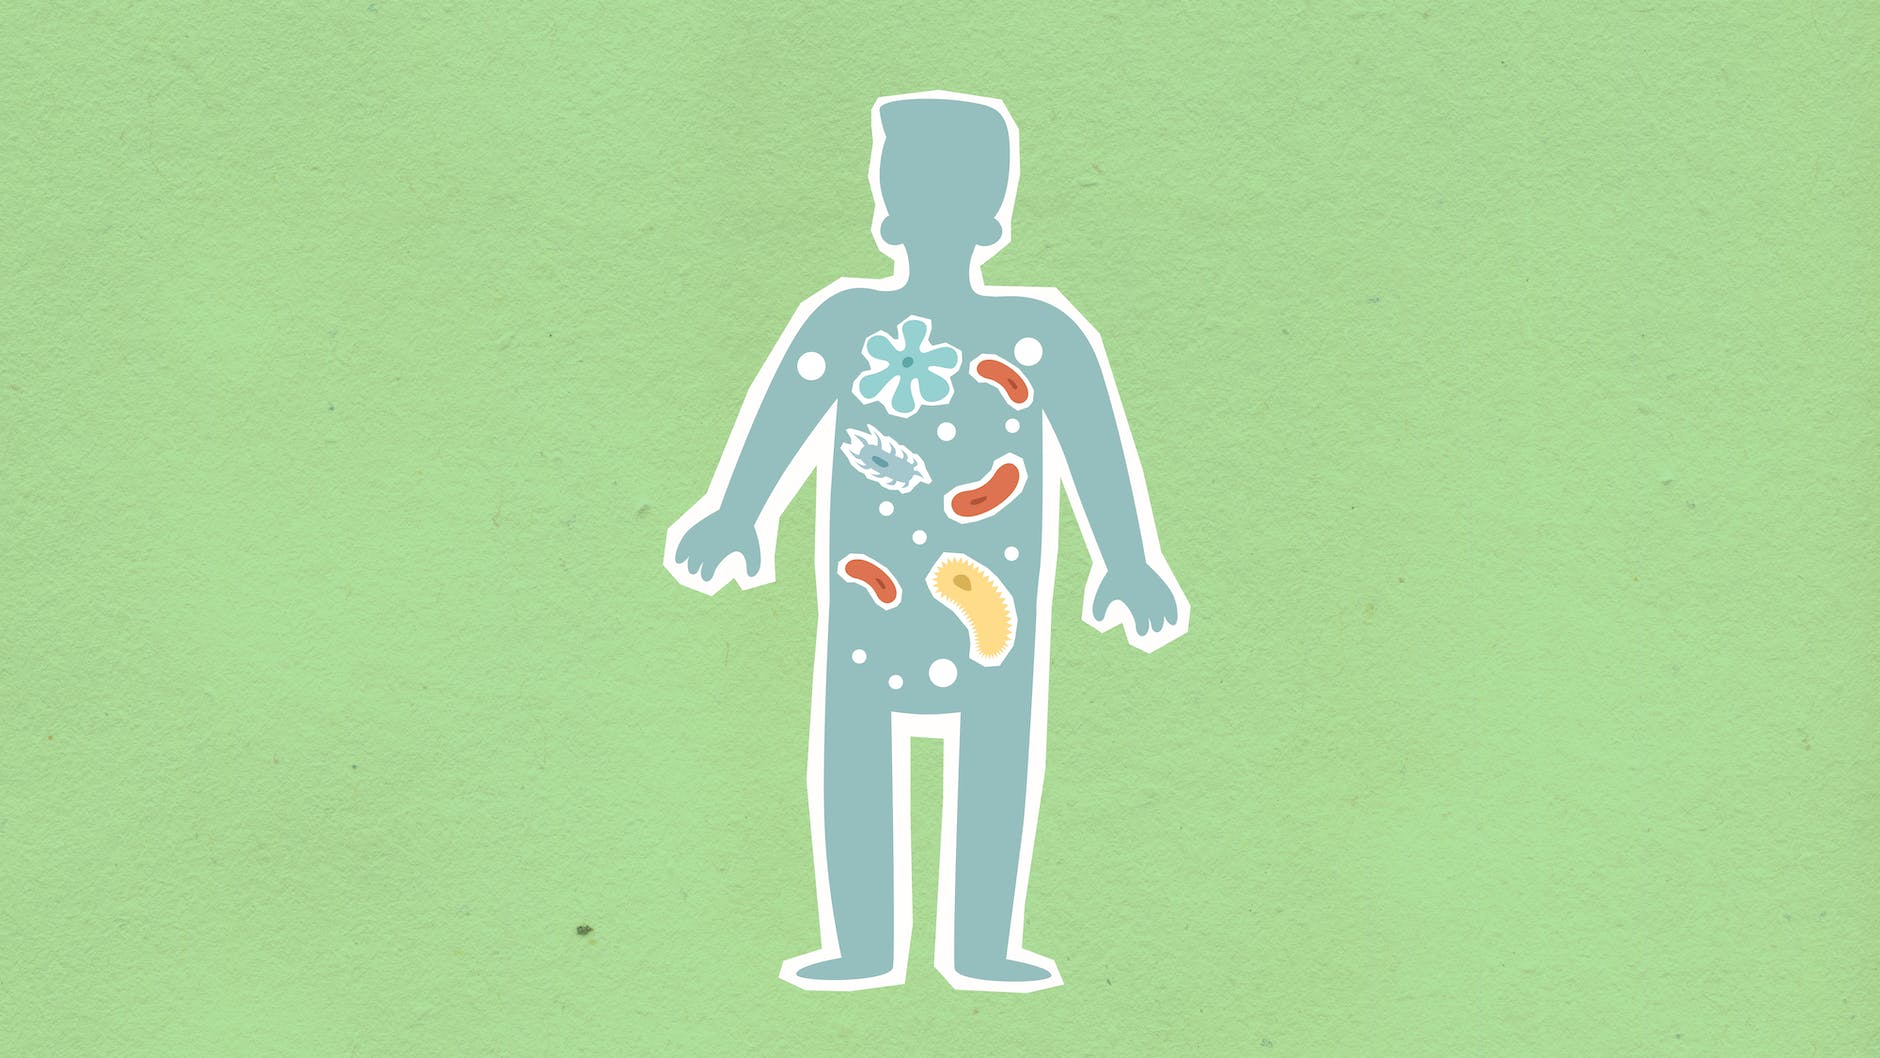 paper applique of human figure with bacteria